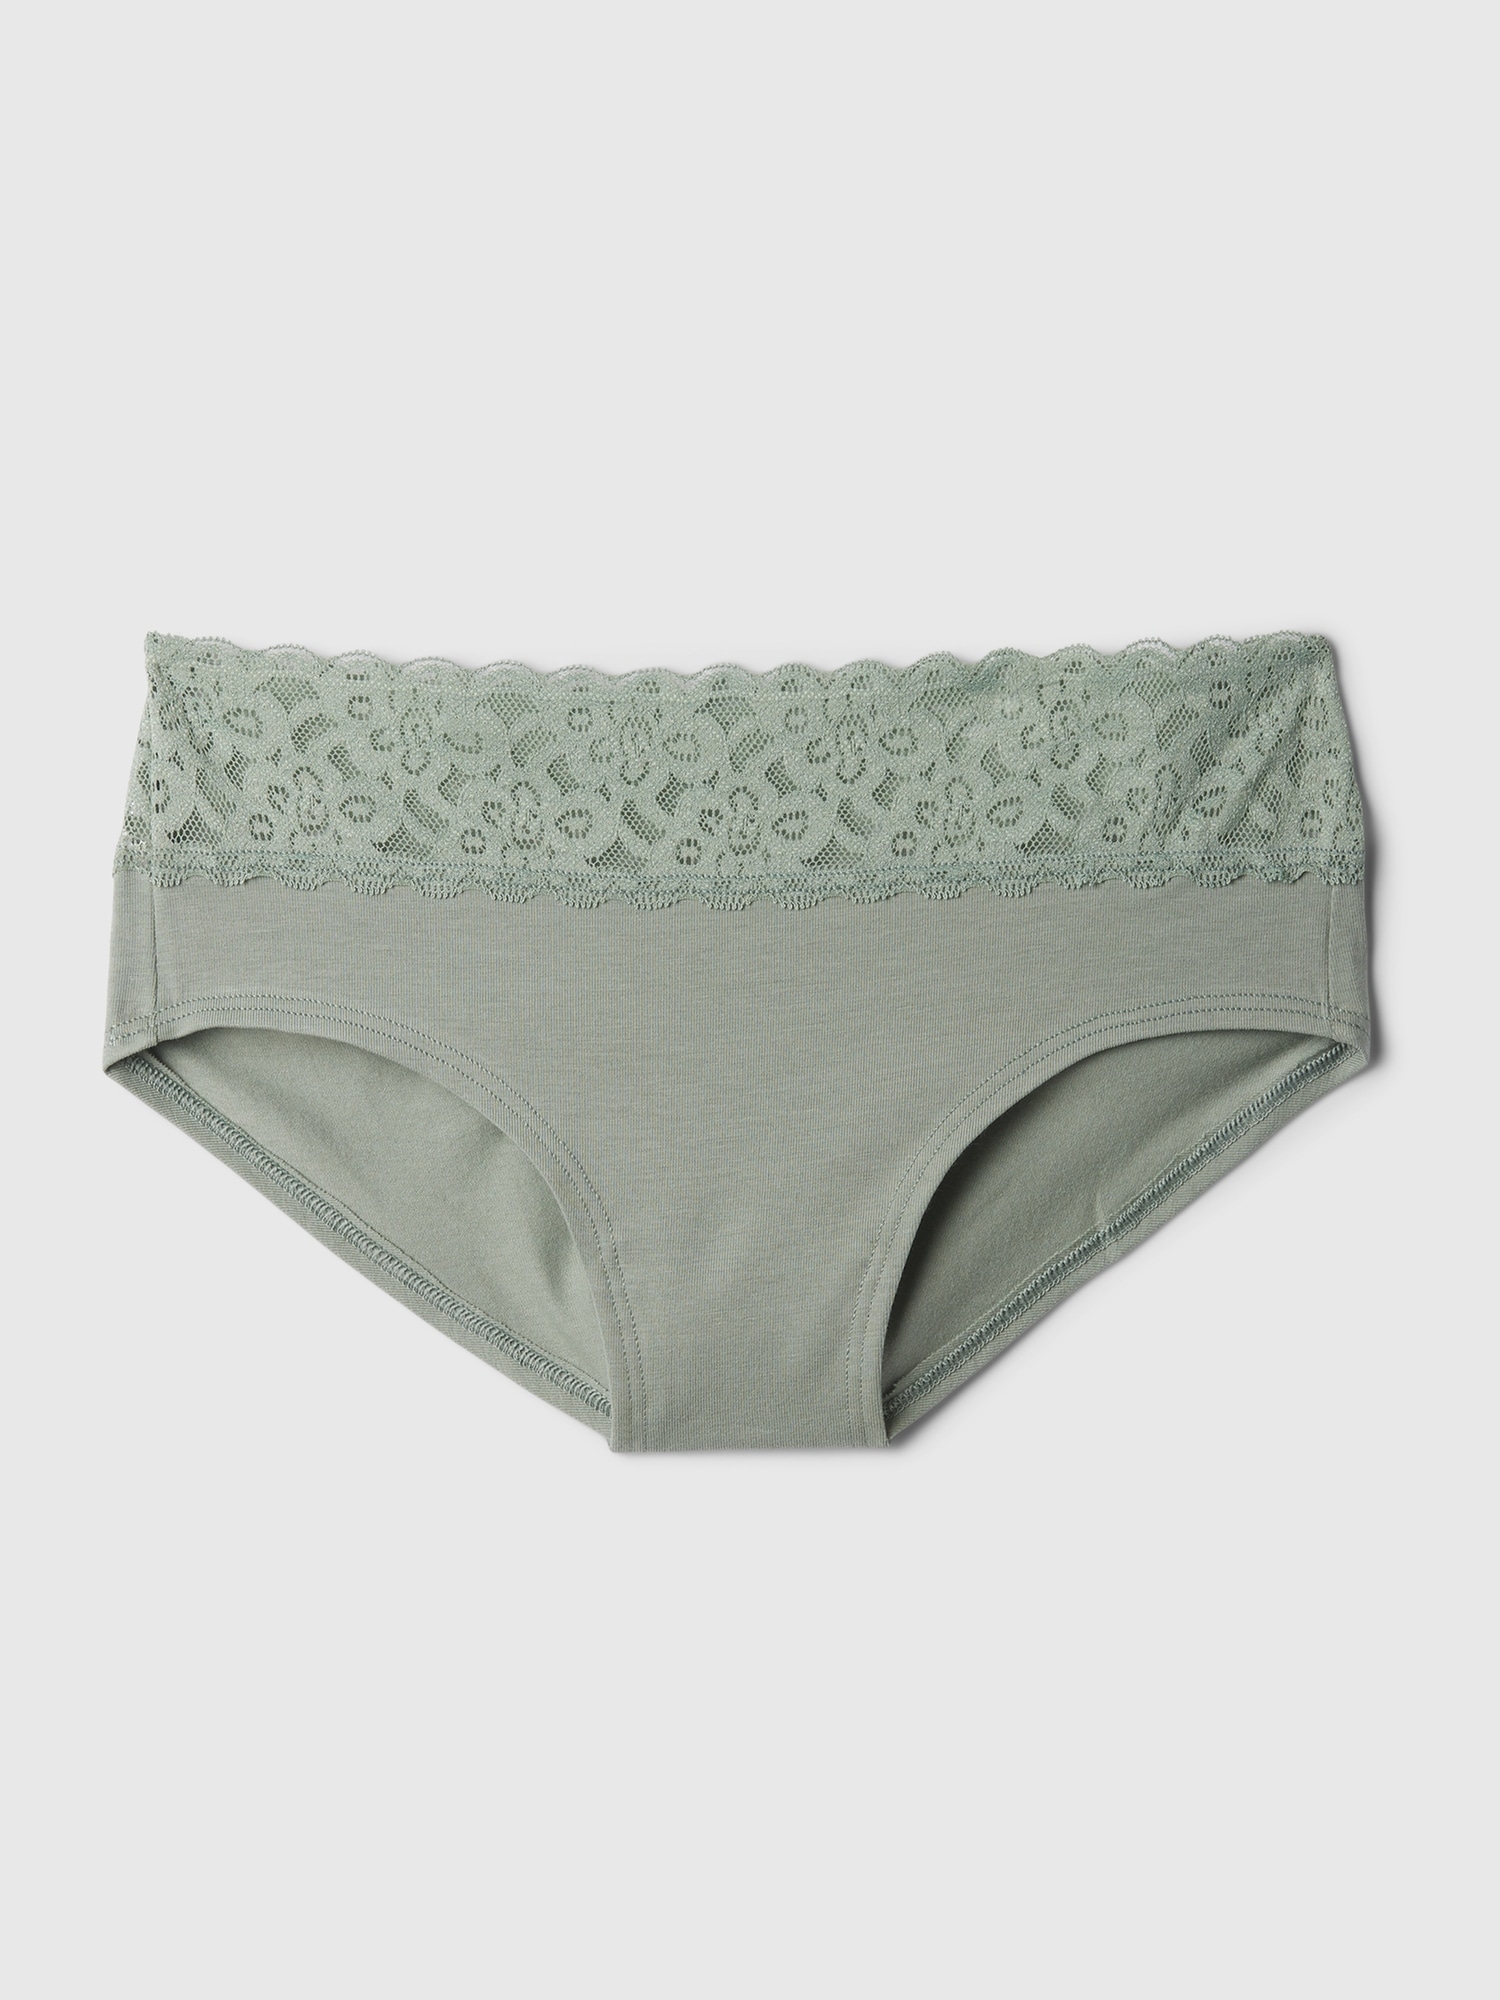 Women's Clearance Lace Waist Thong 6-pack made with Organic Cotton